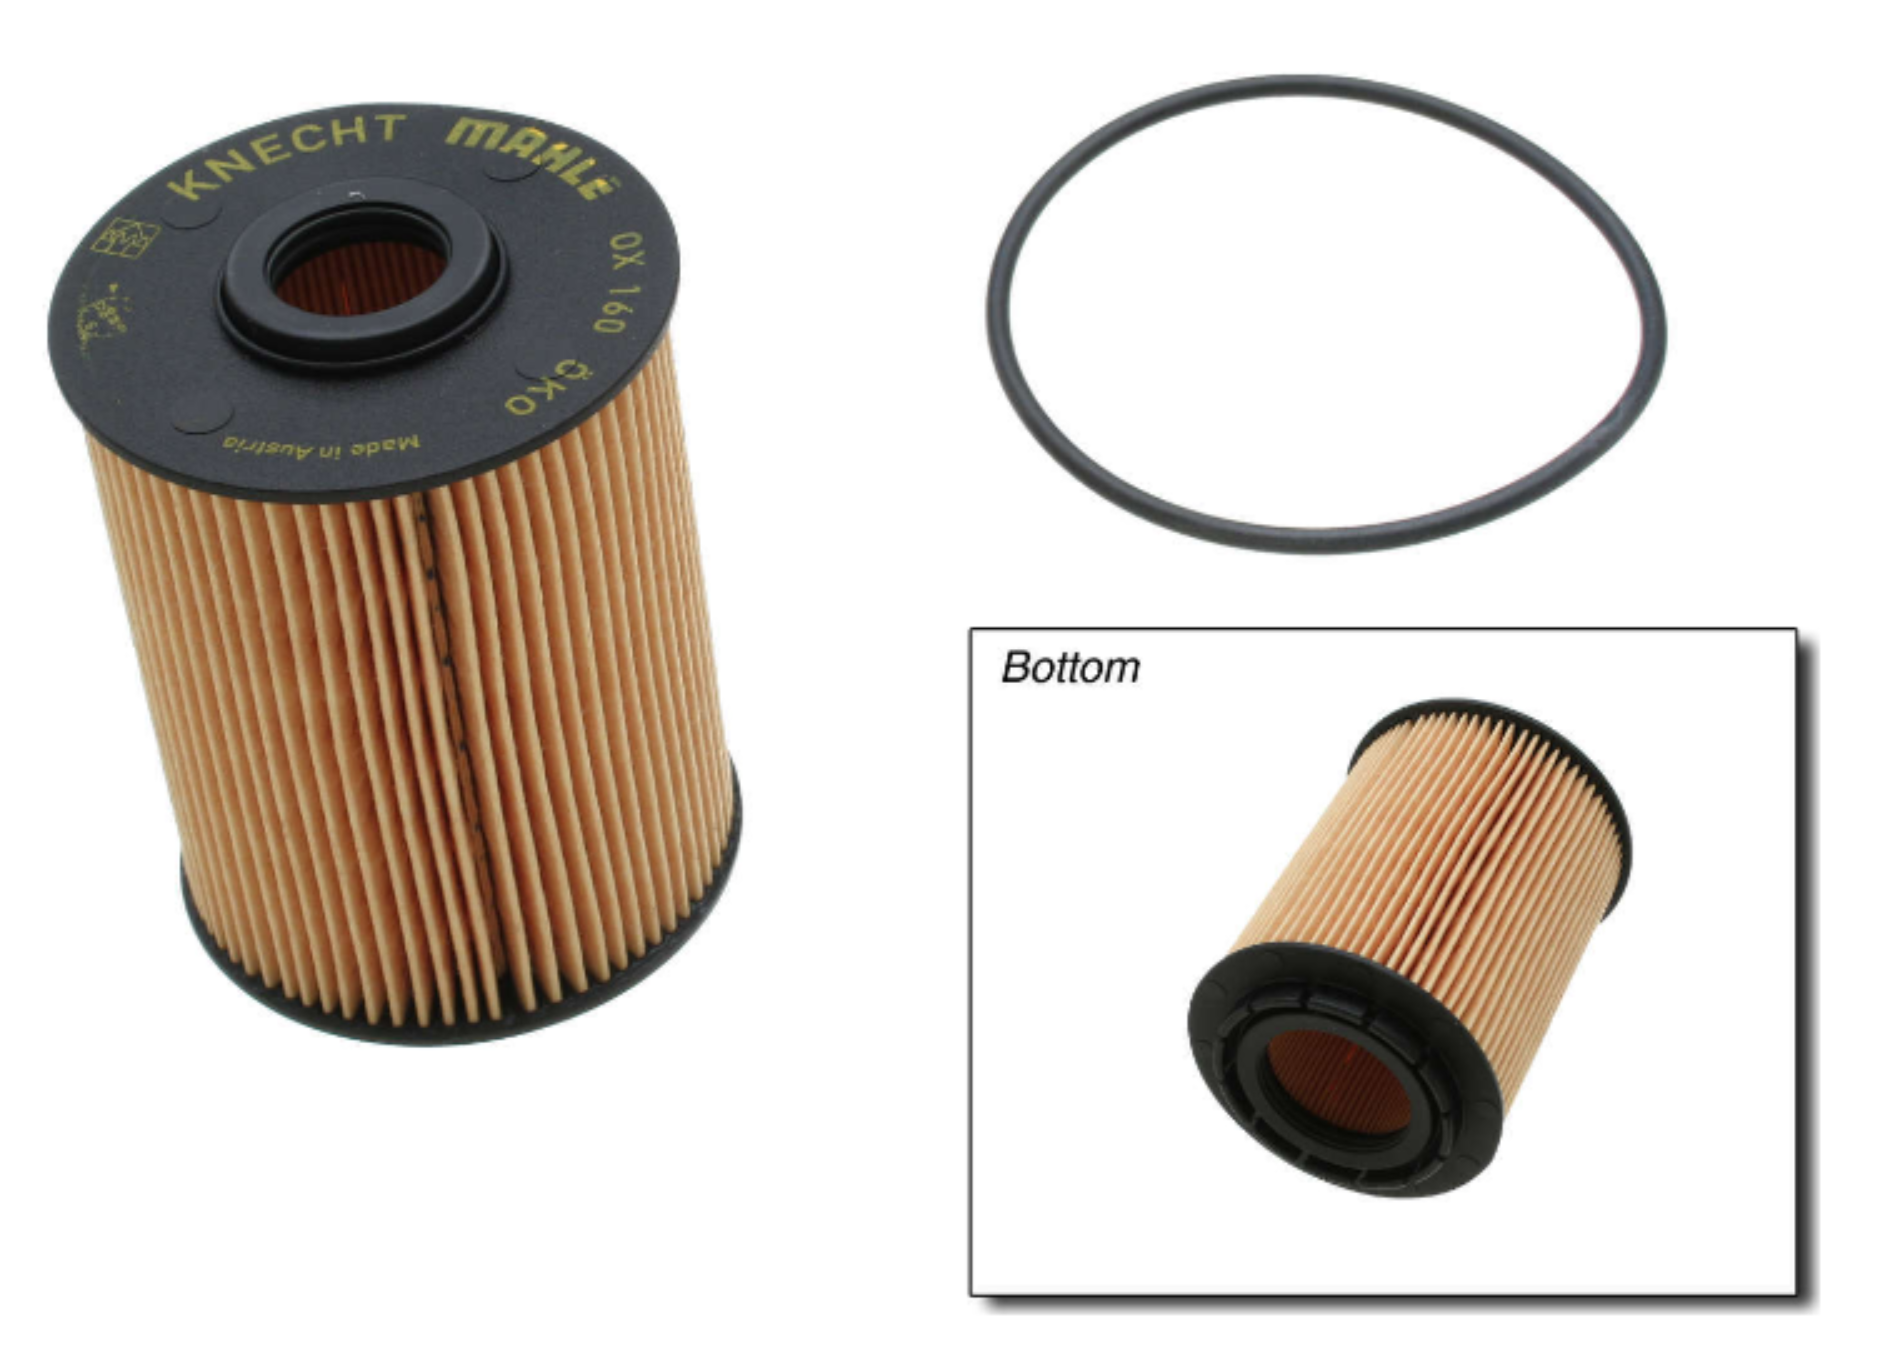 VW Oil Filter - Genuine Mahle 021115562A